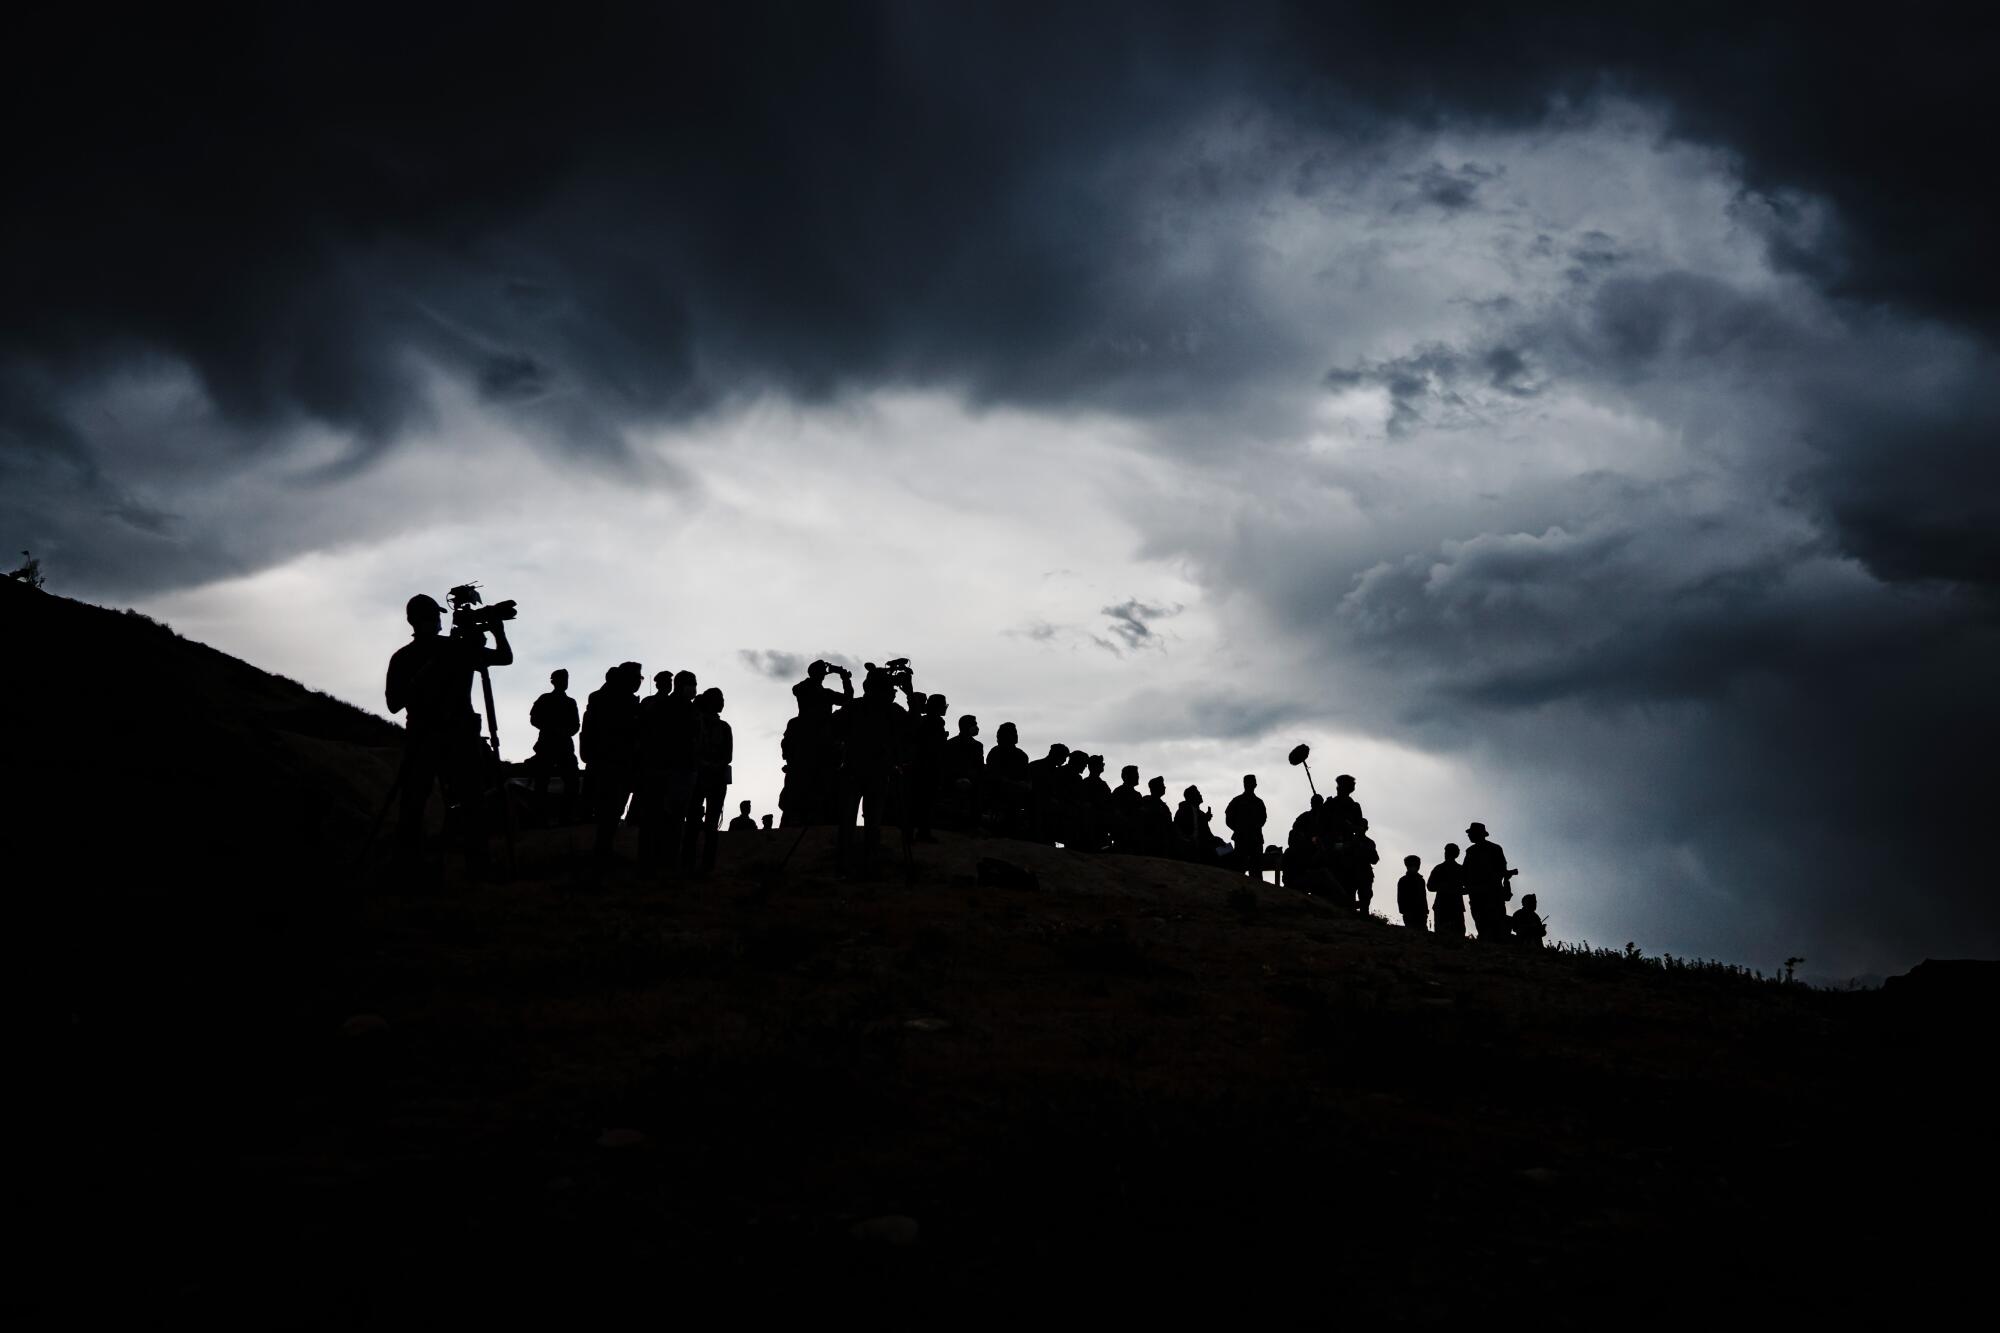 Troops and journalists are silhouetted on a hilltop